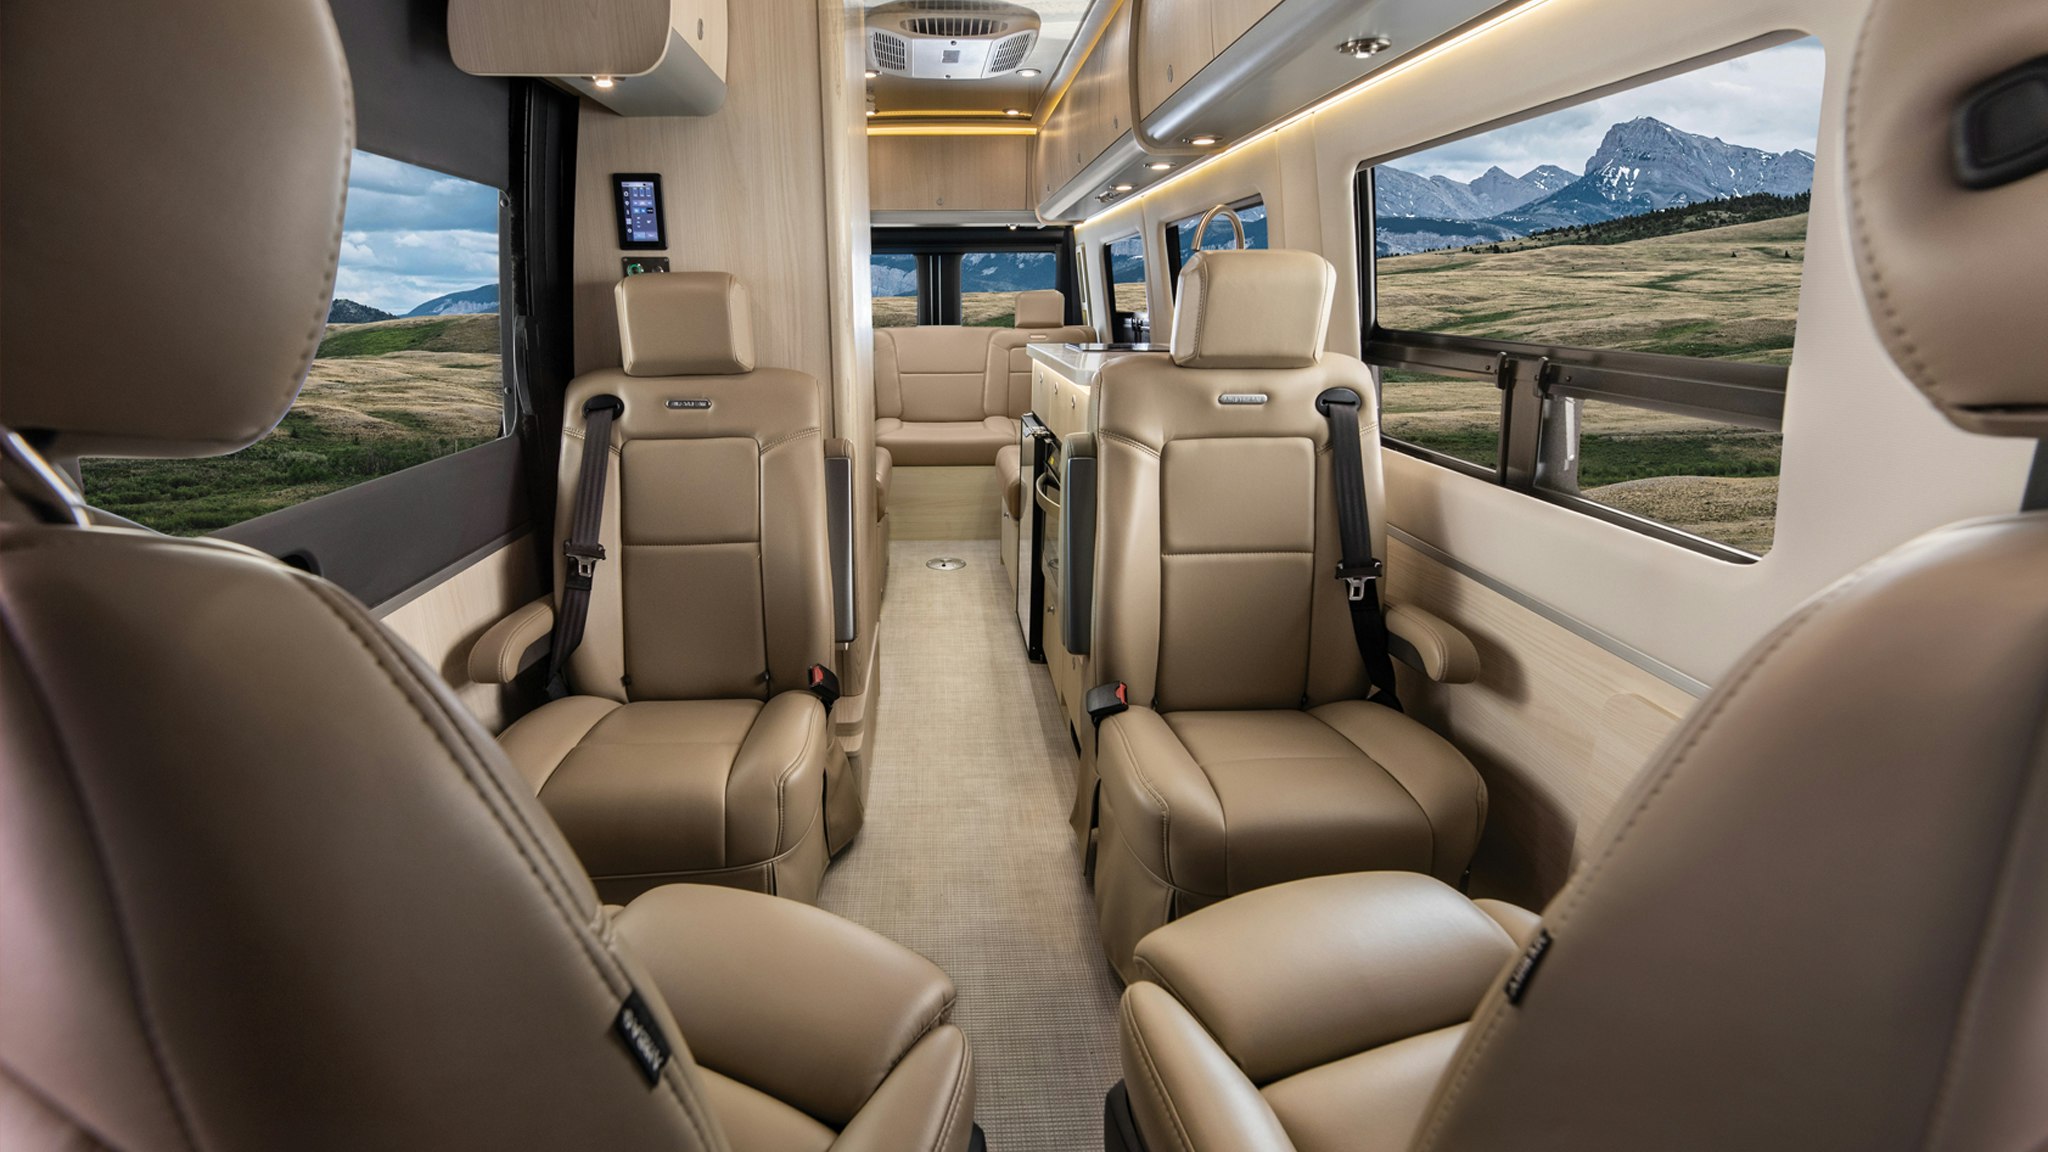 Airstream class b interior of the new classic canyon decor